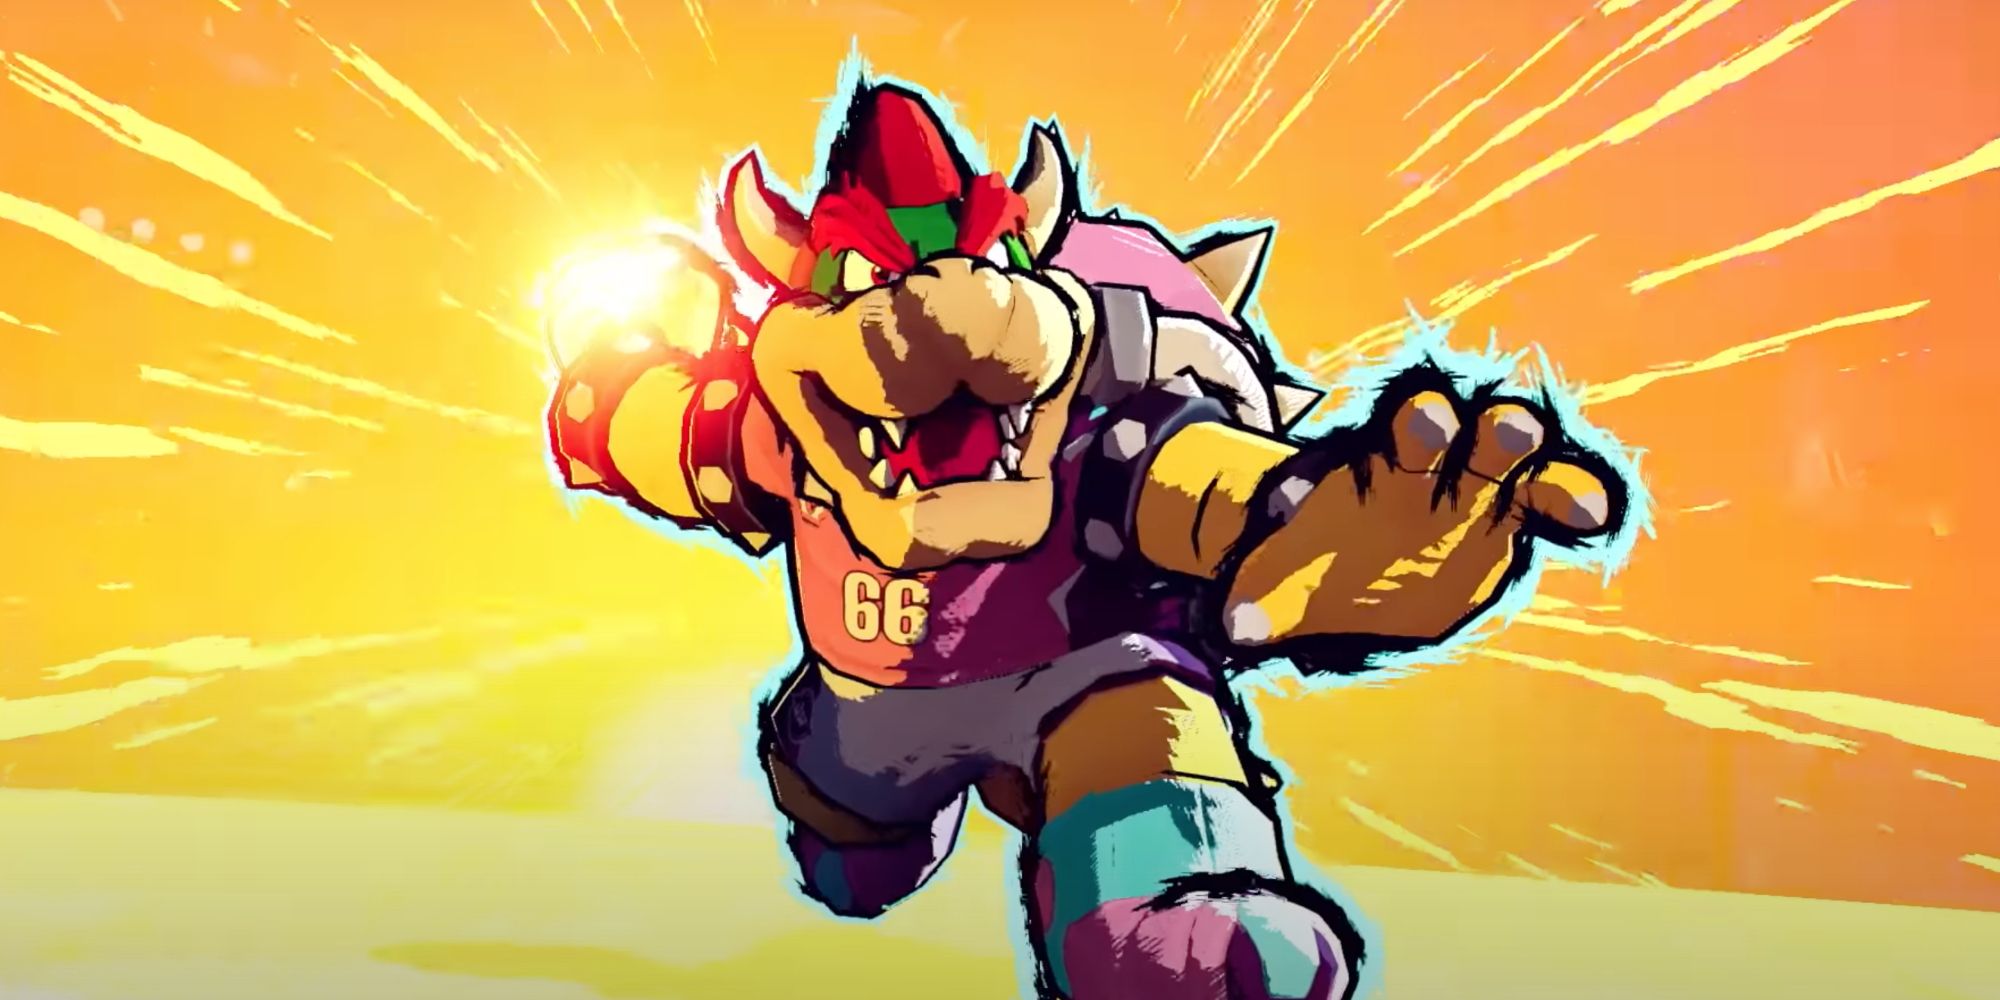 A new trailer for Mario Strikers: Battle League has confirmed that the game will only include 10 playable characters at launch.